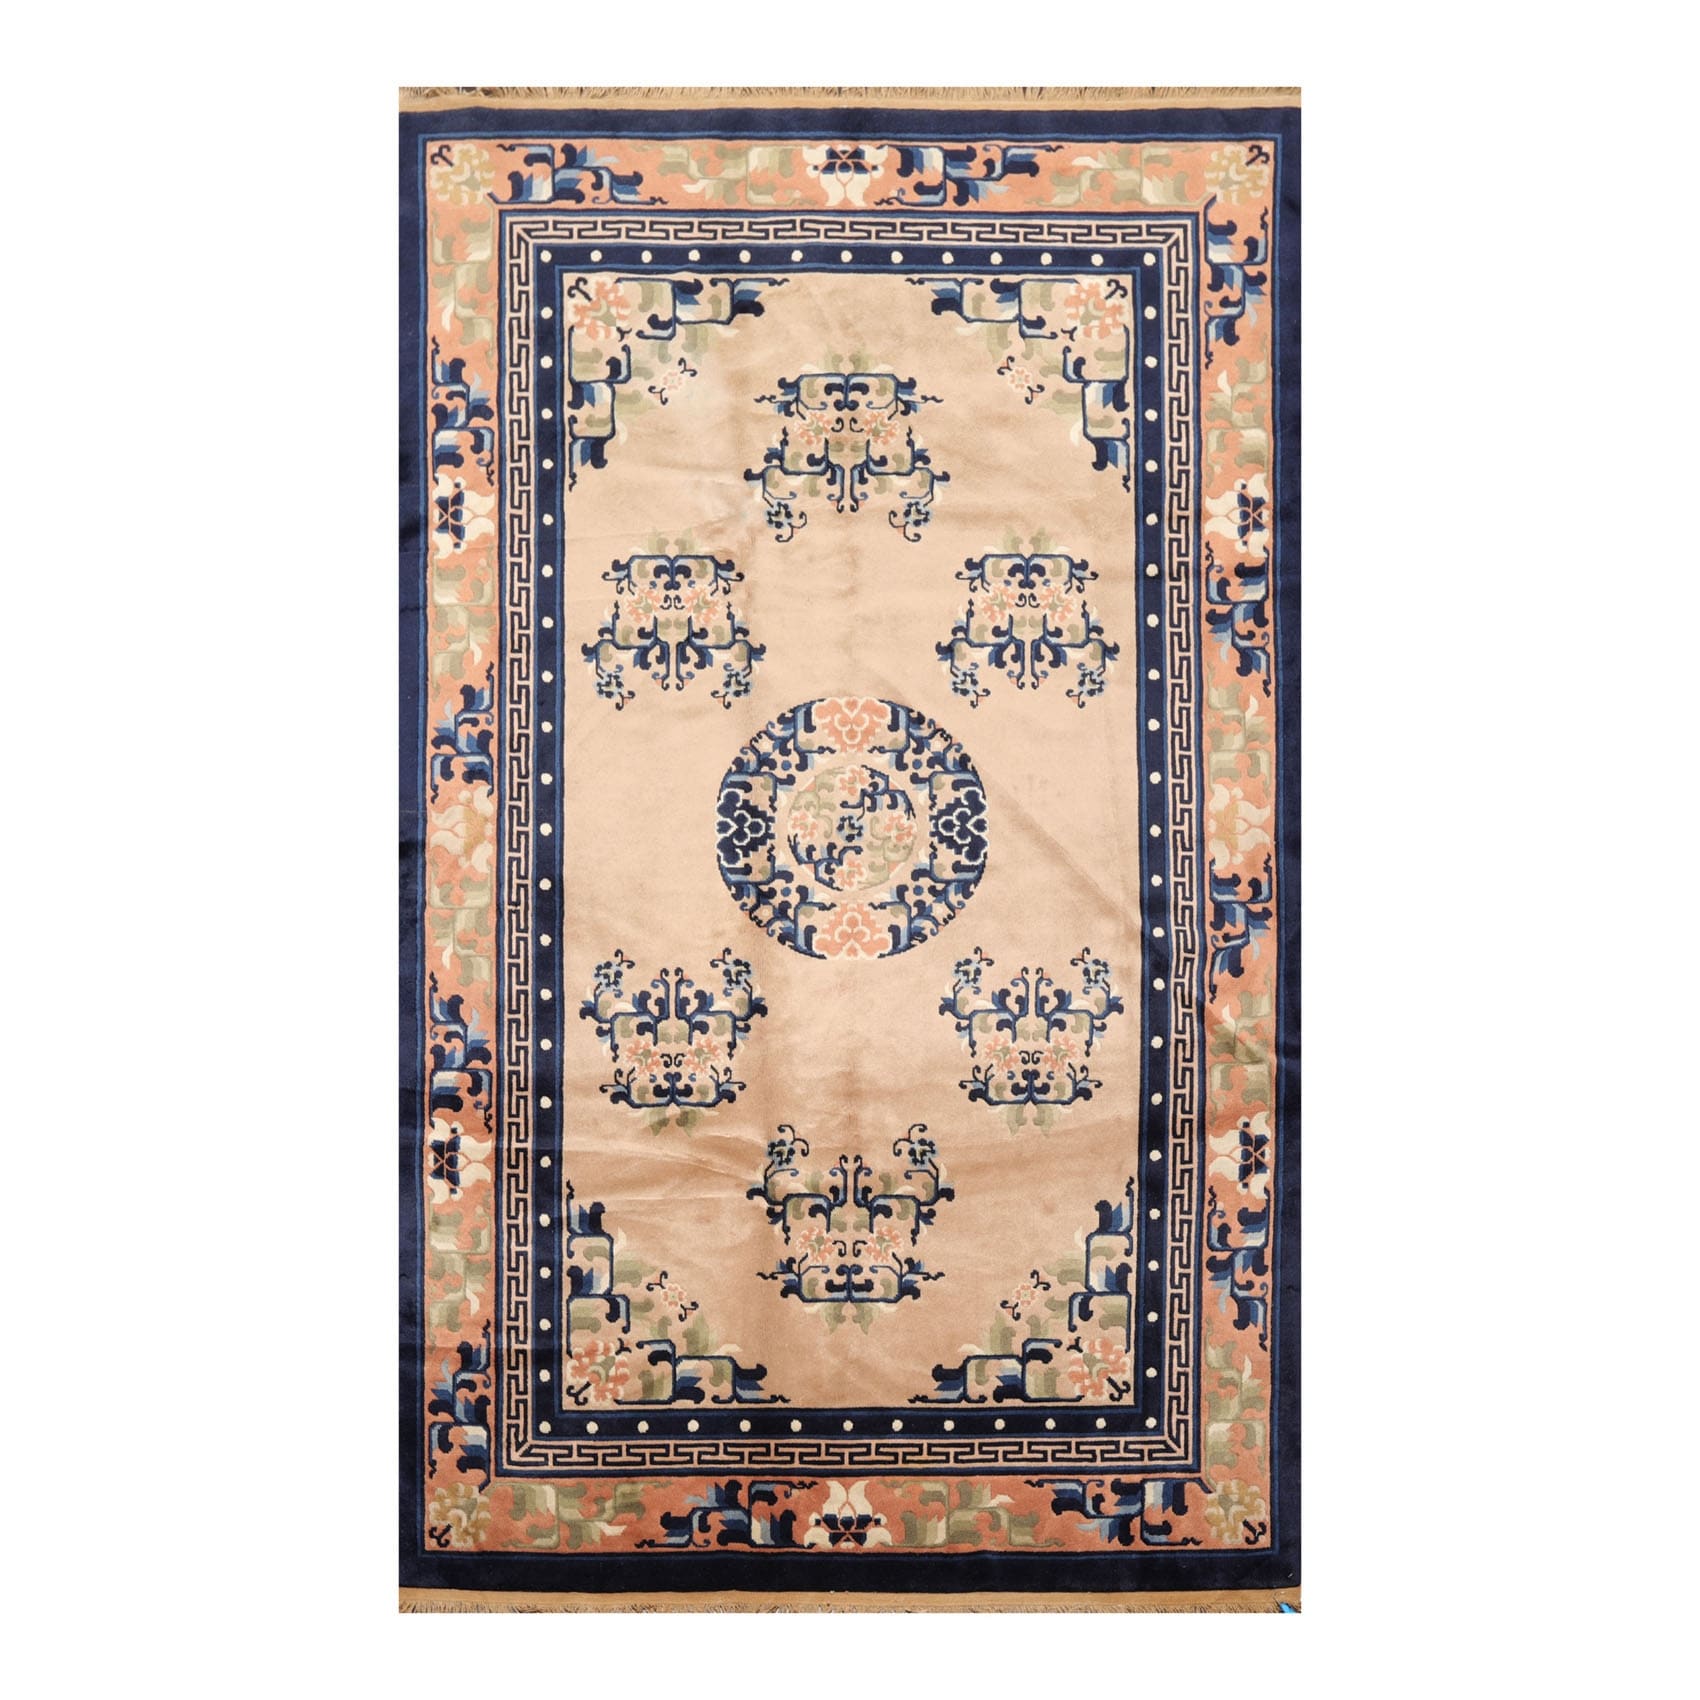 Geometric Design RugsTC 5'1 x 7'9 Caucasian Design Area Rug with Silk & Wool Pile 100% Original Hand-Knotted in Red,Beige,Reddish Brown Colors a 5x8 Rectangular Rug